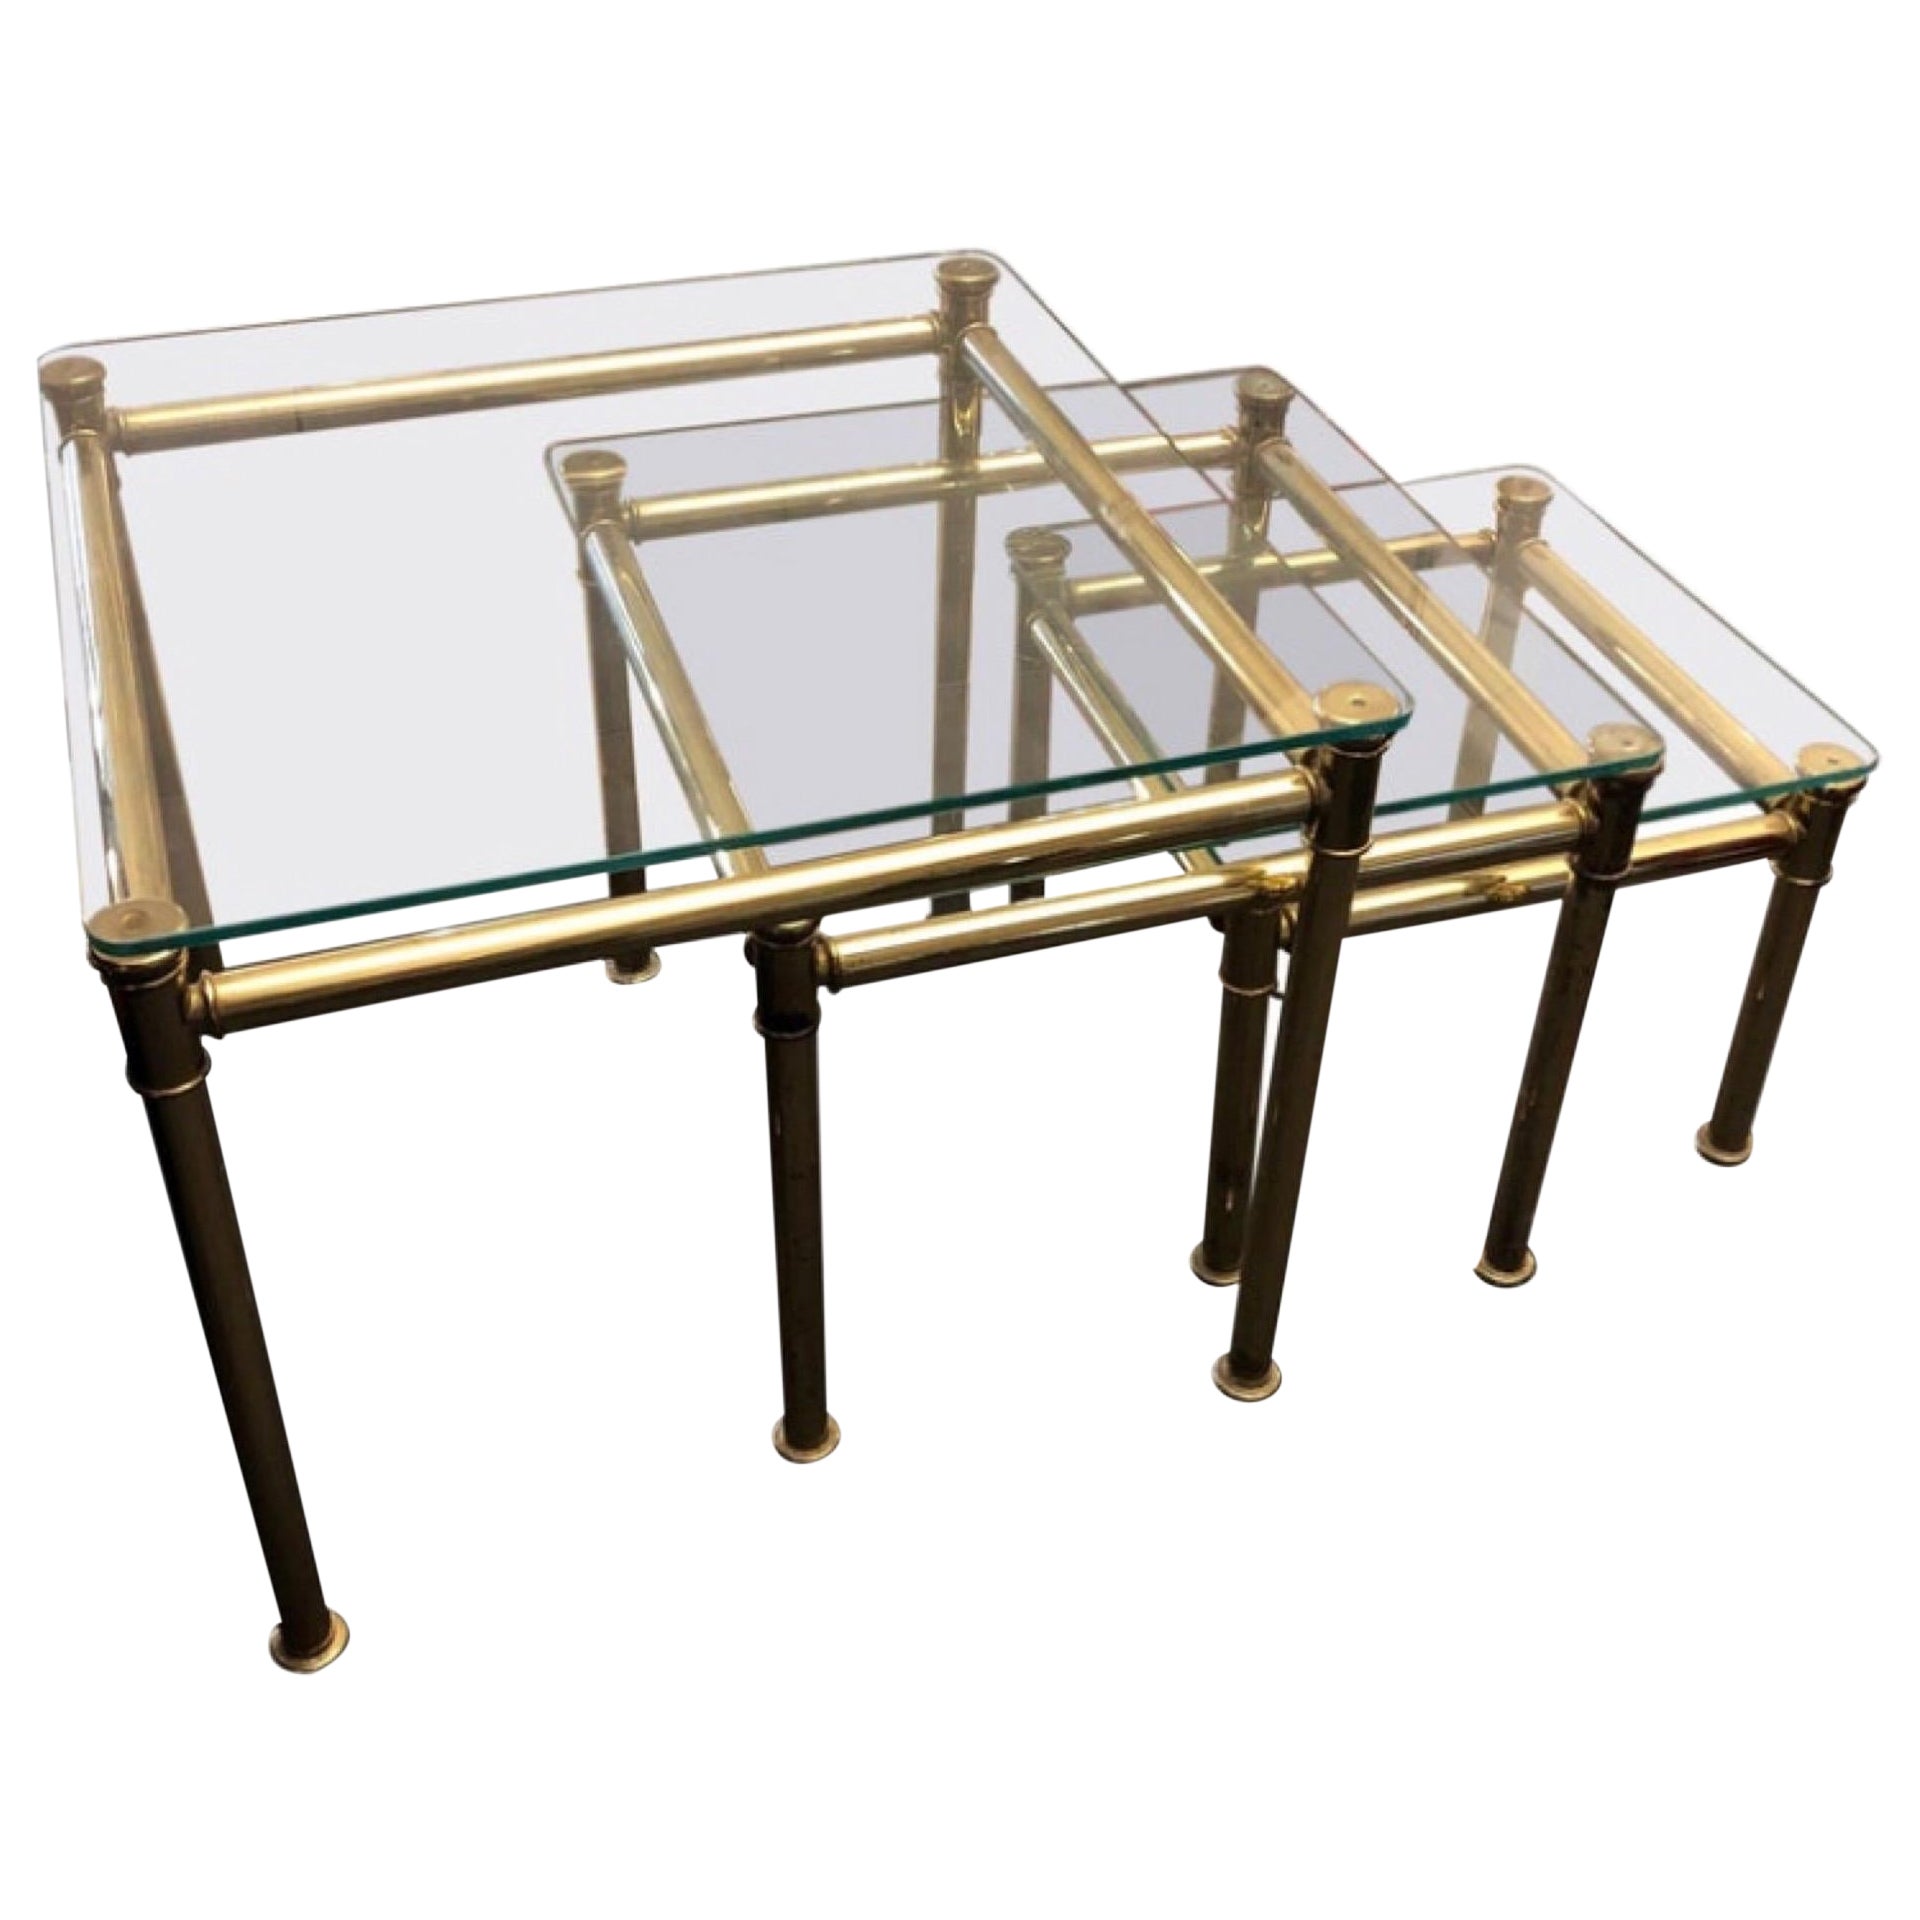 Three 1960s Mid-Century Modern Brass and Glass Italian Nesting Square Tables